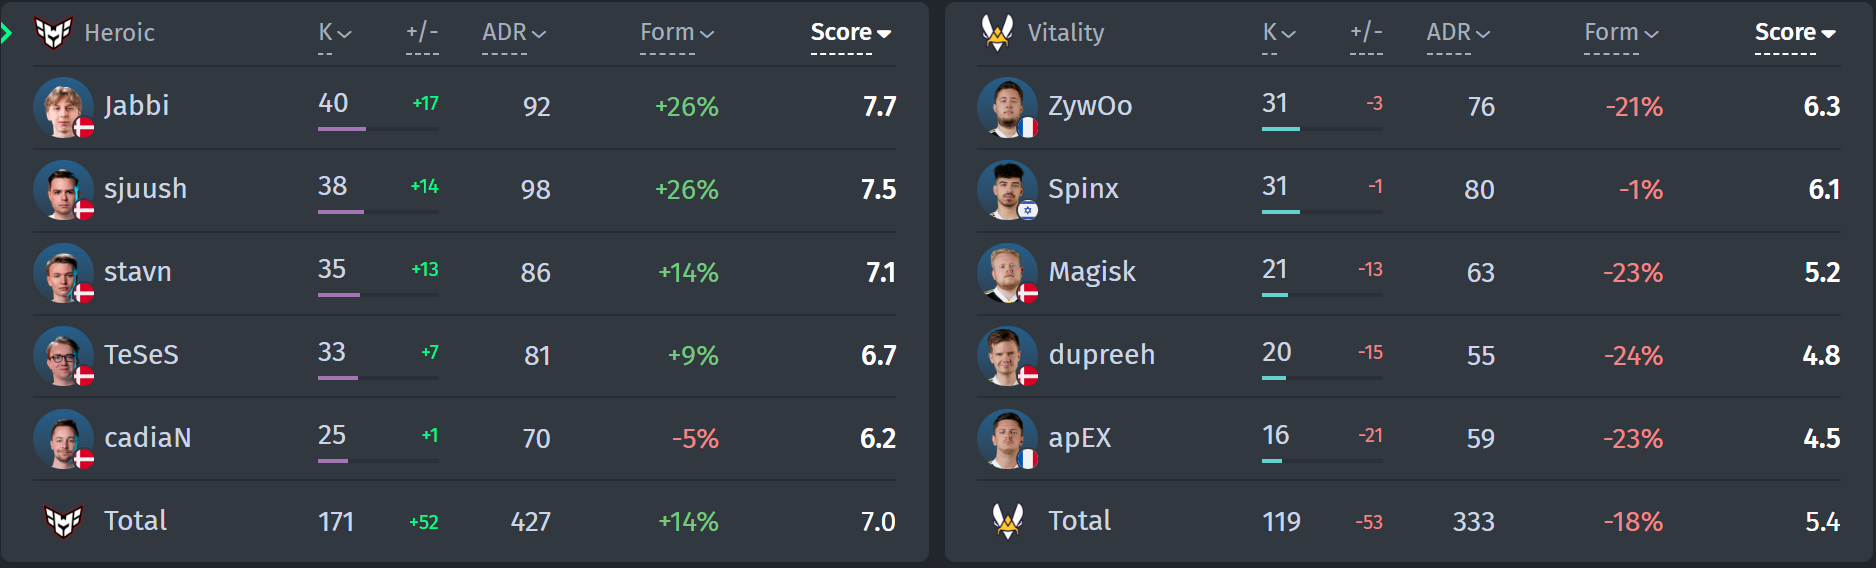 Player statistics in the match Heroic vs Team Vitality